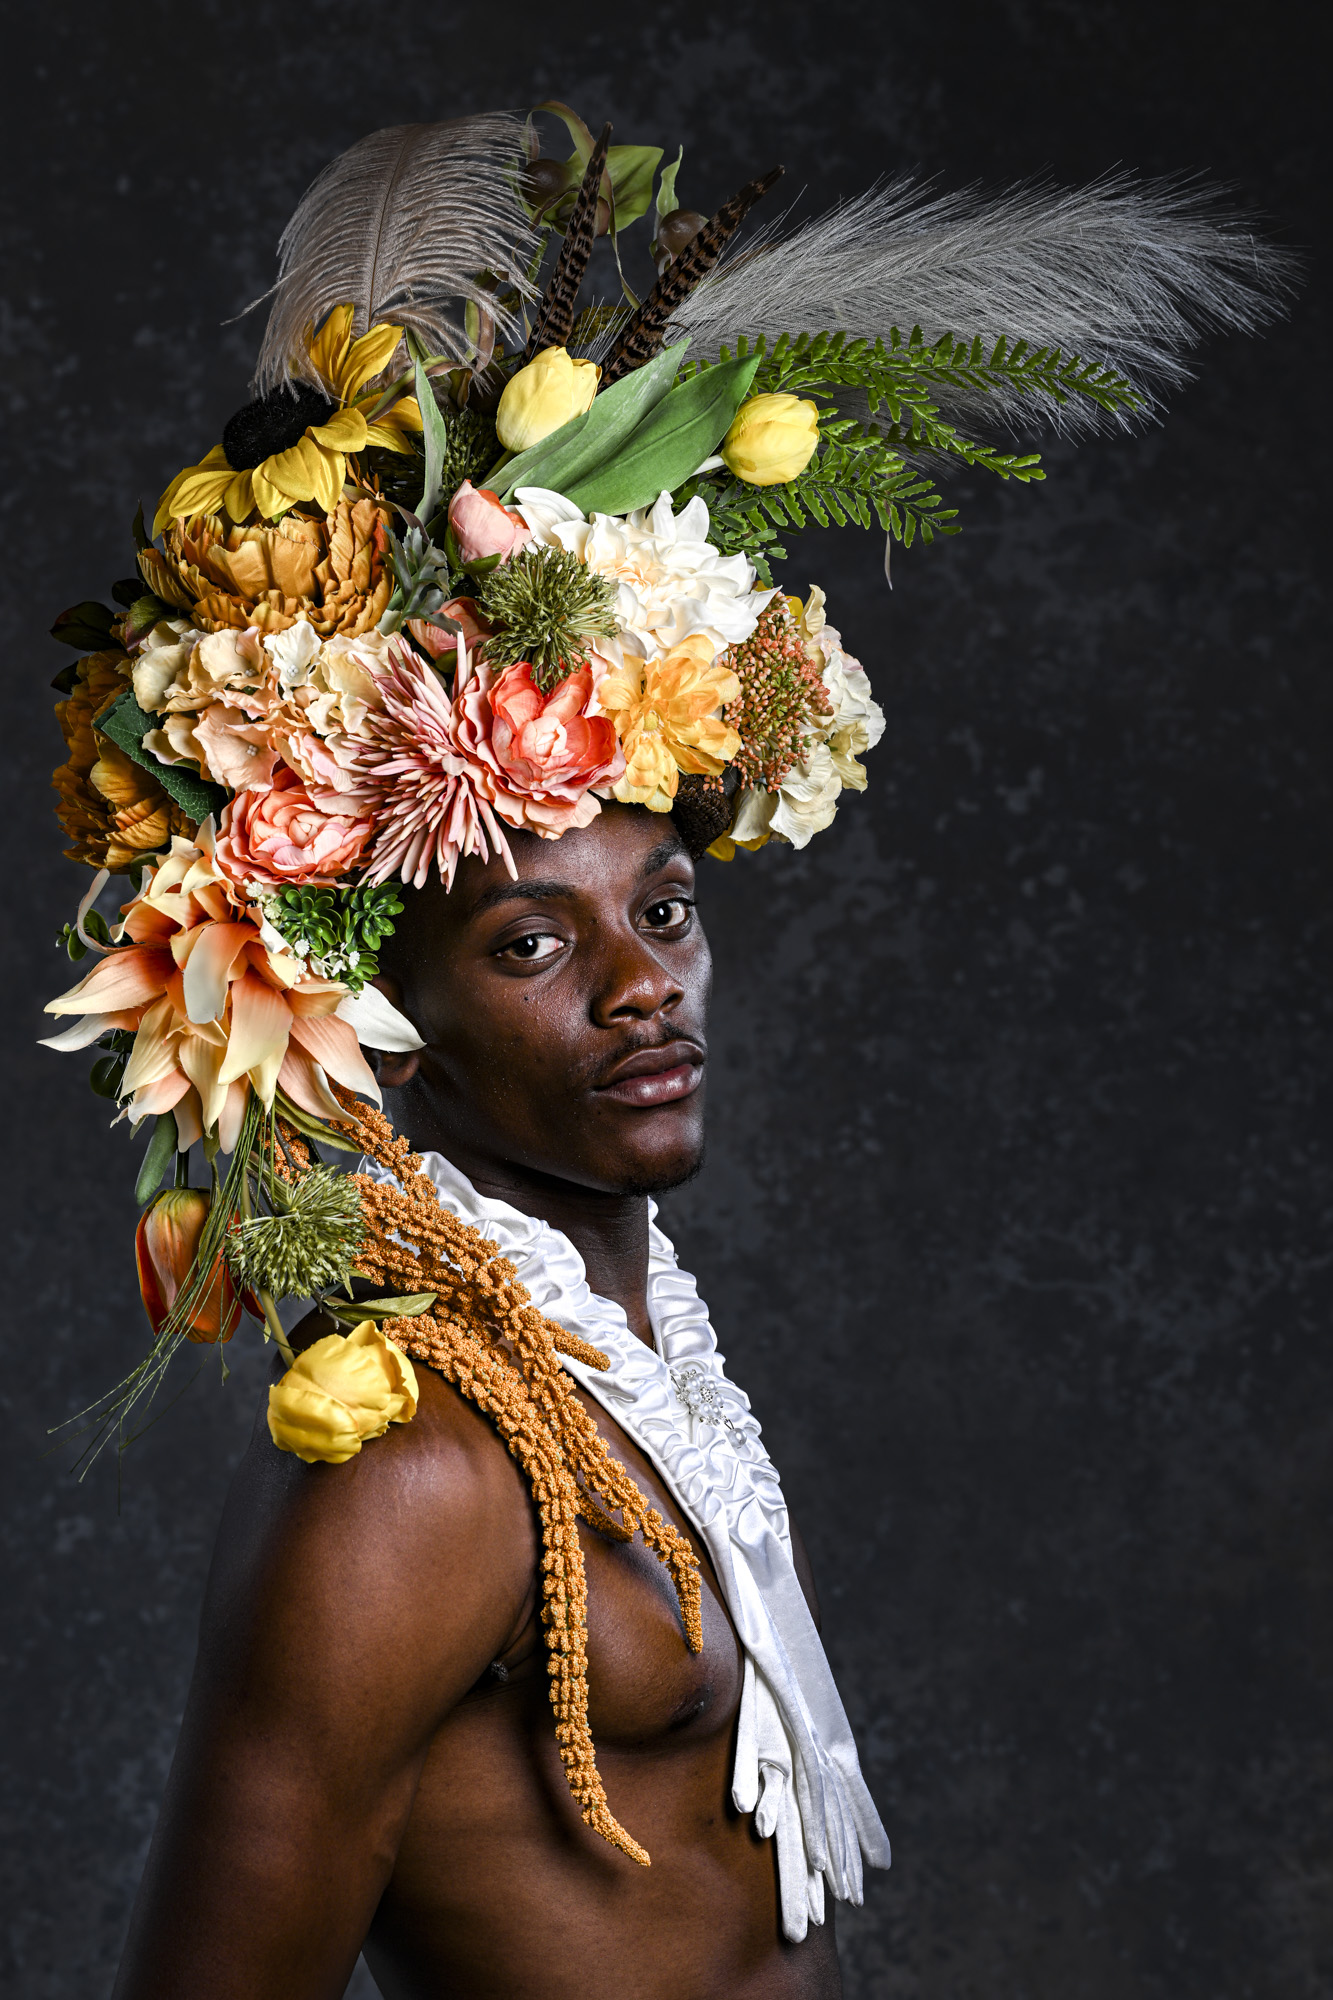 Studio portrait taken with Nikon Z8 of a model with colorful floral headpiece